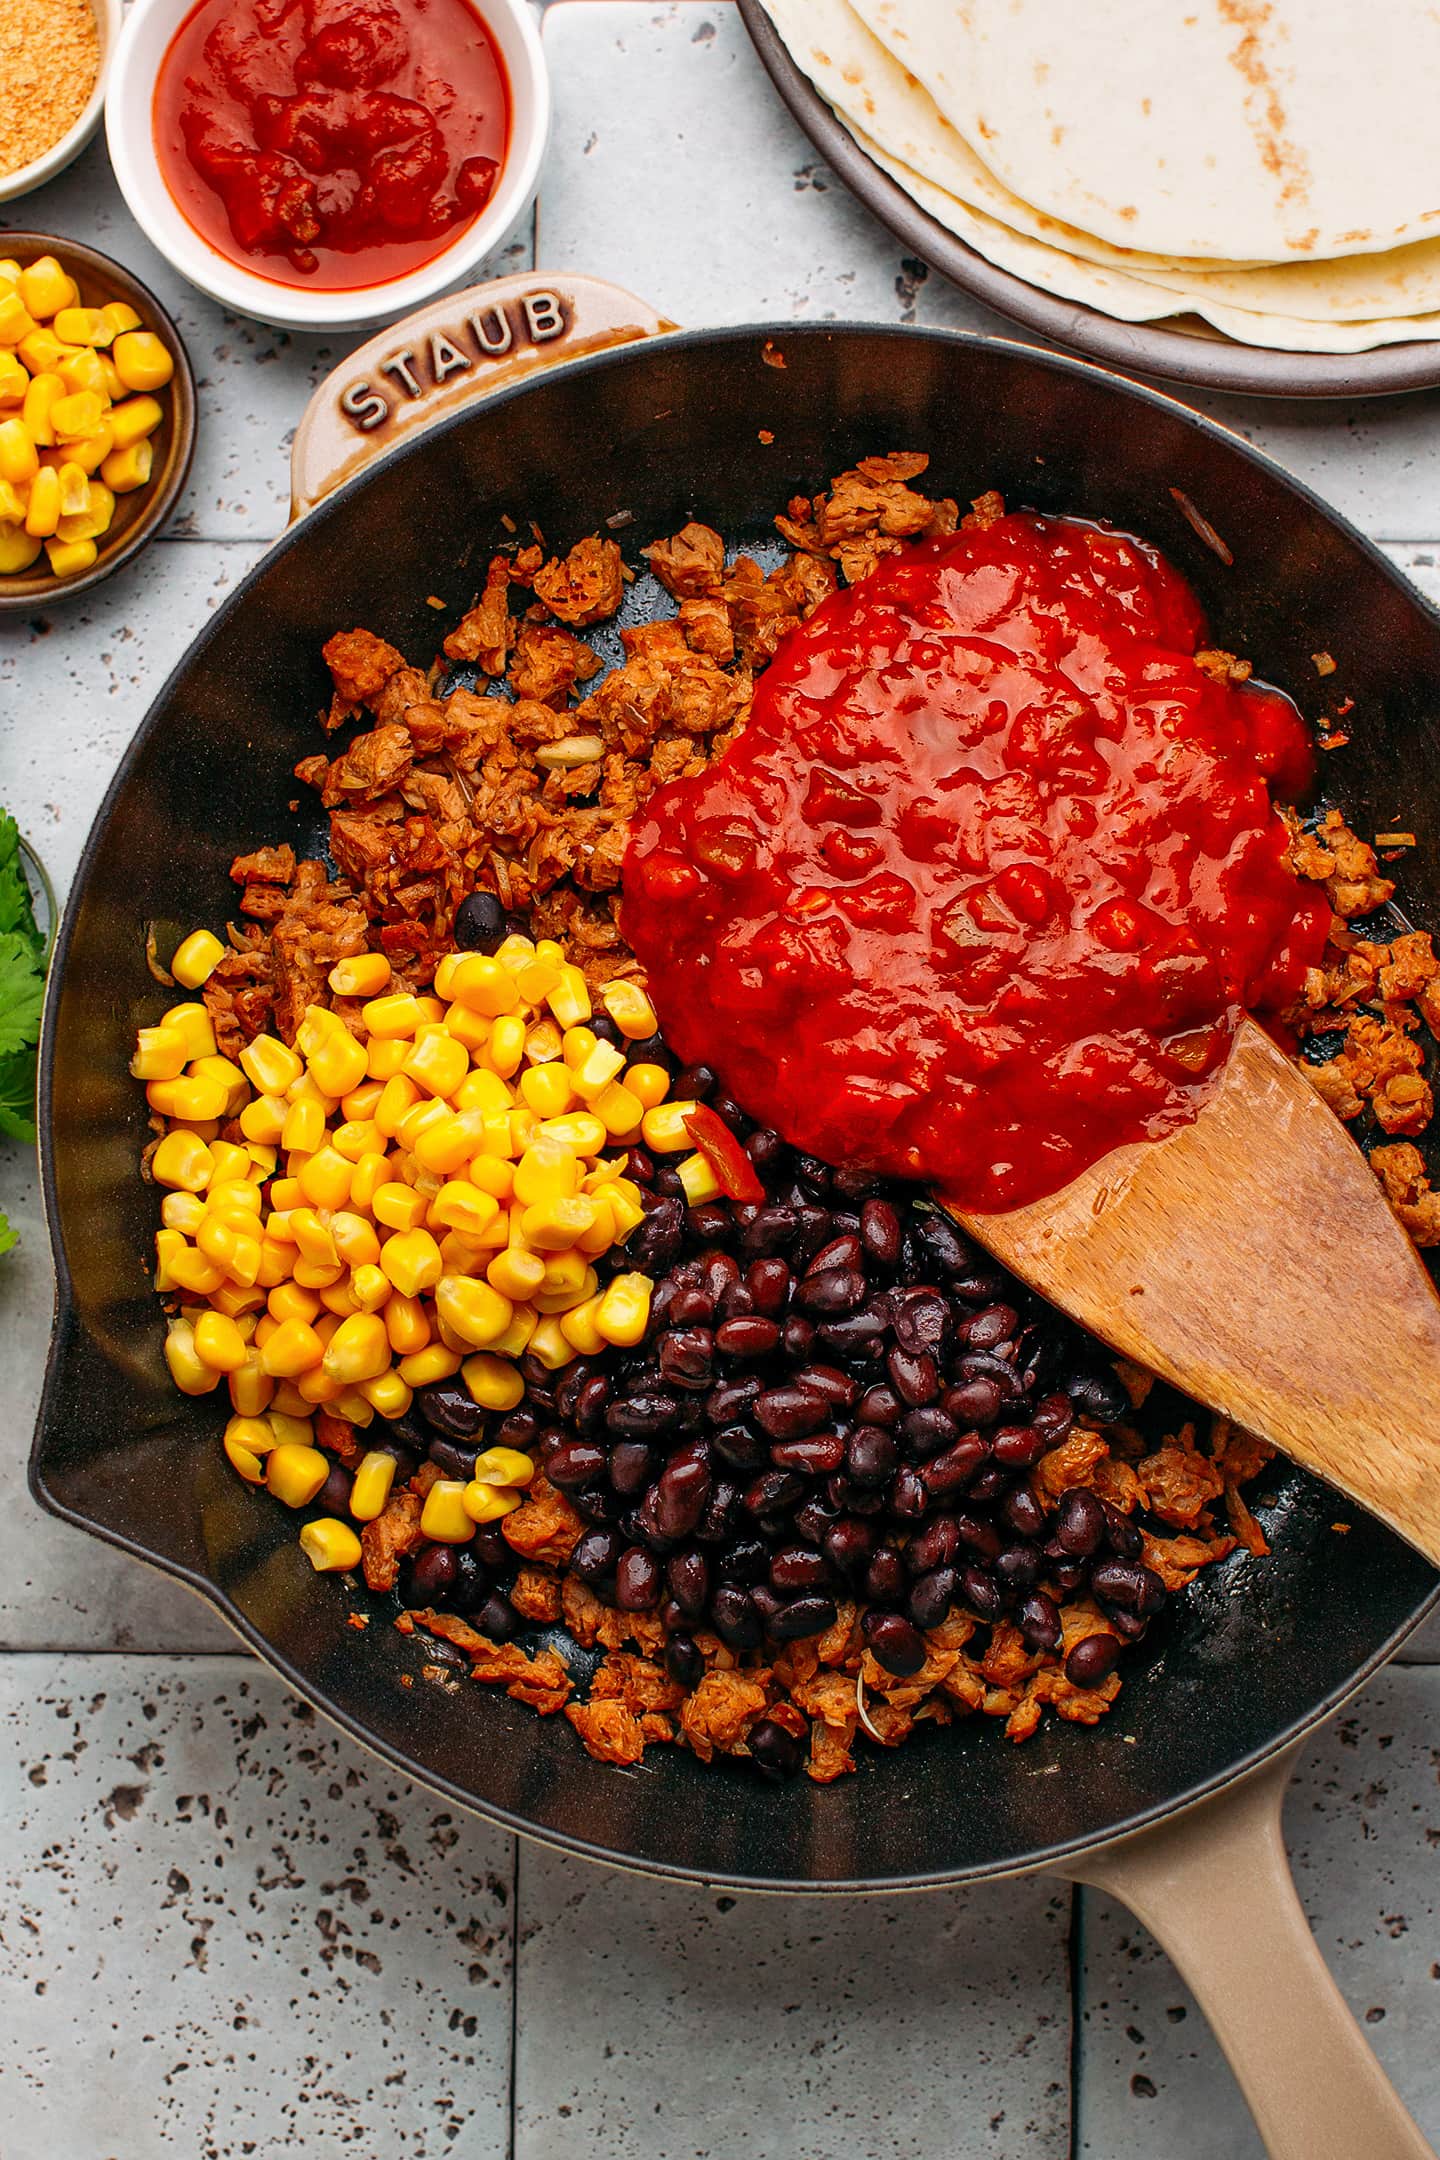 Black beans, corn, soy curls, and enchilada sauce in a skillet.